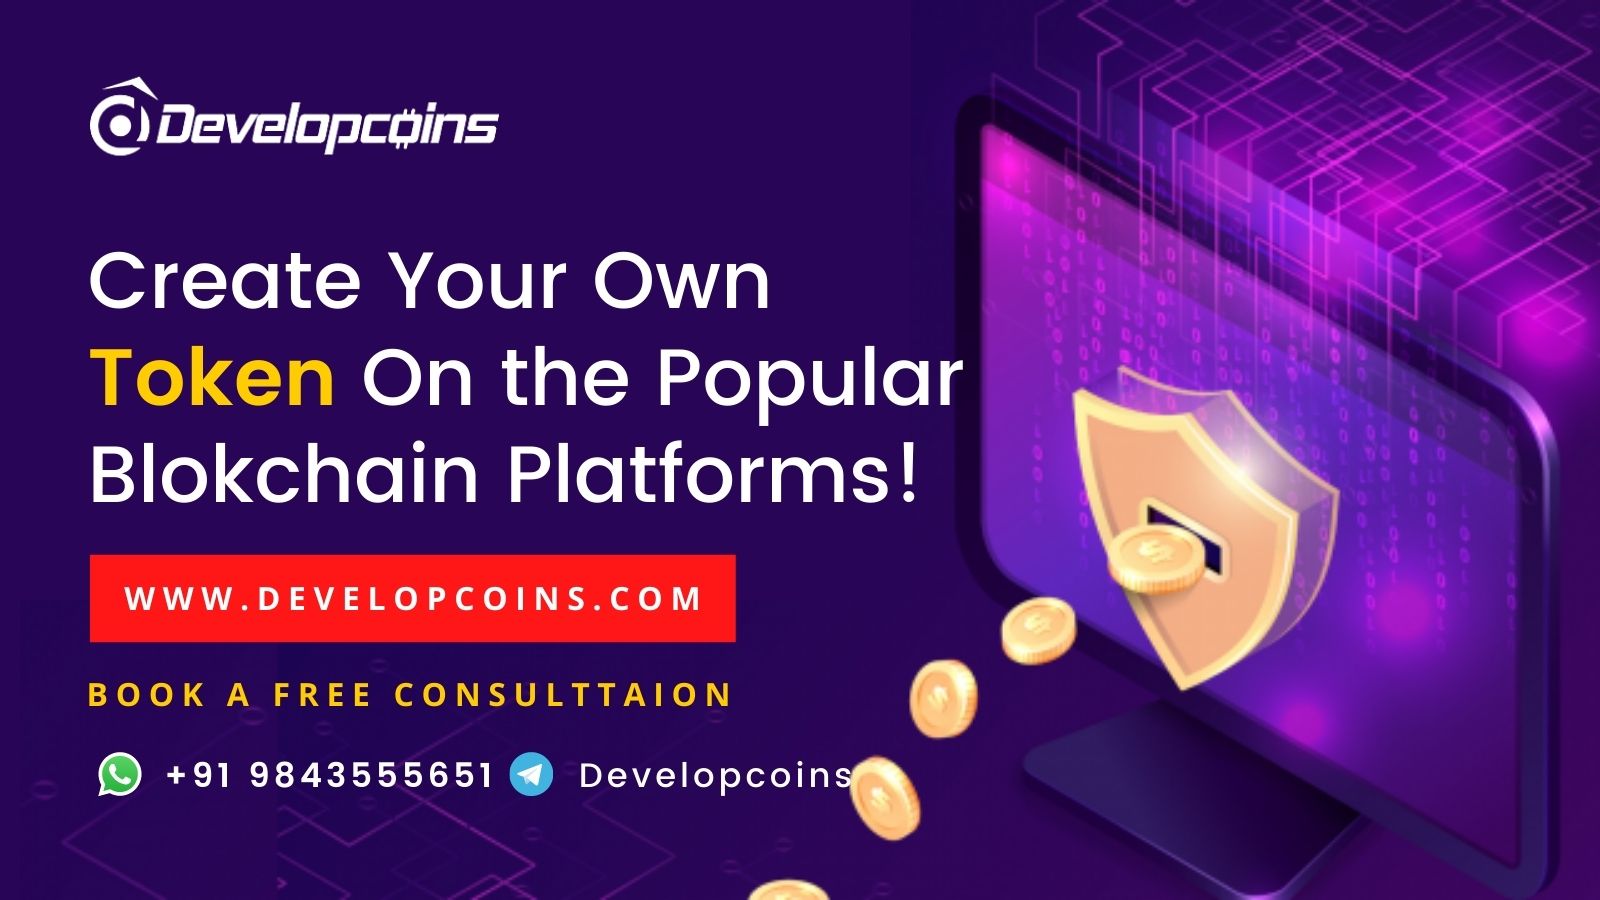 Article about Create Your Own Token Using Token Development Company | Developcoins